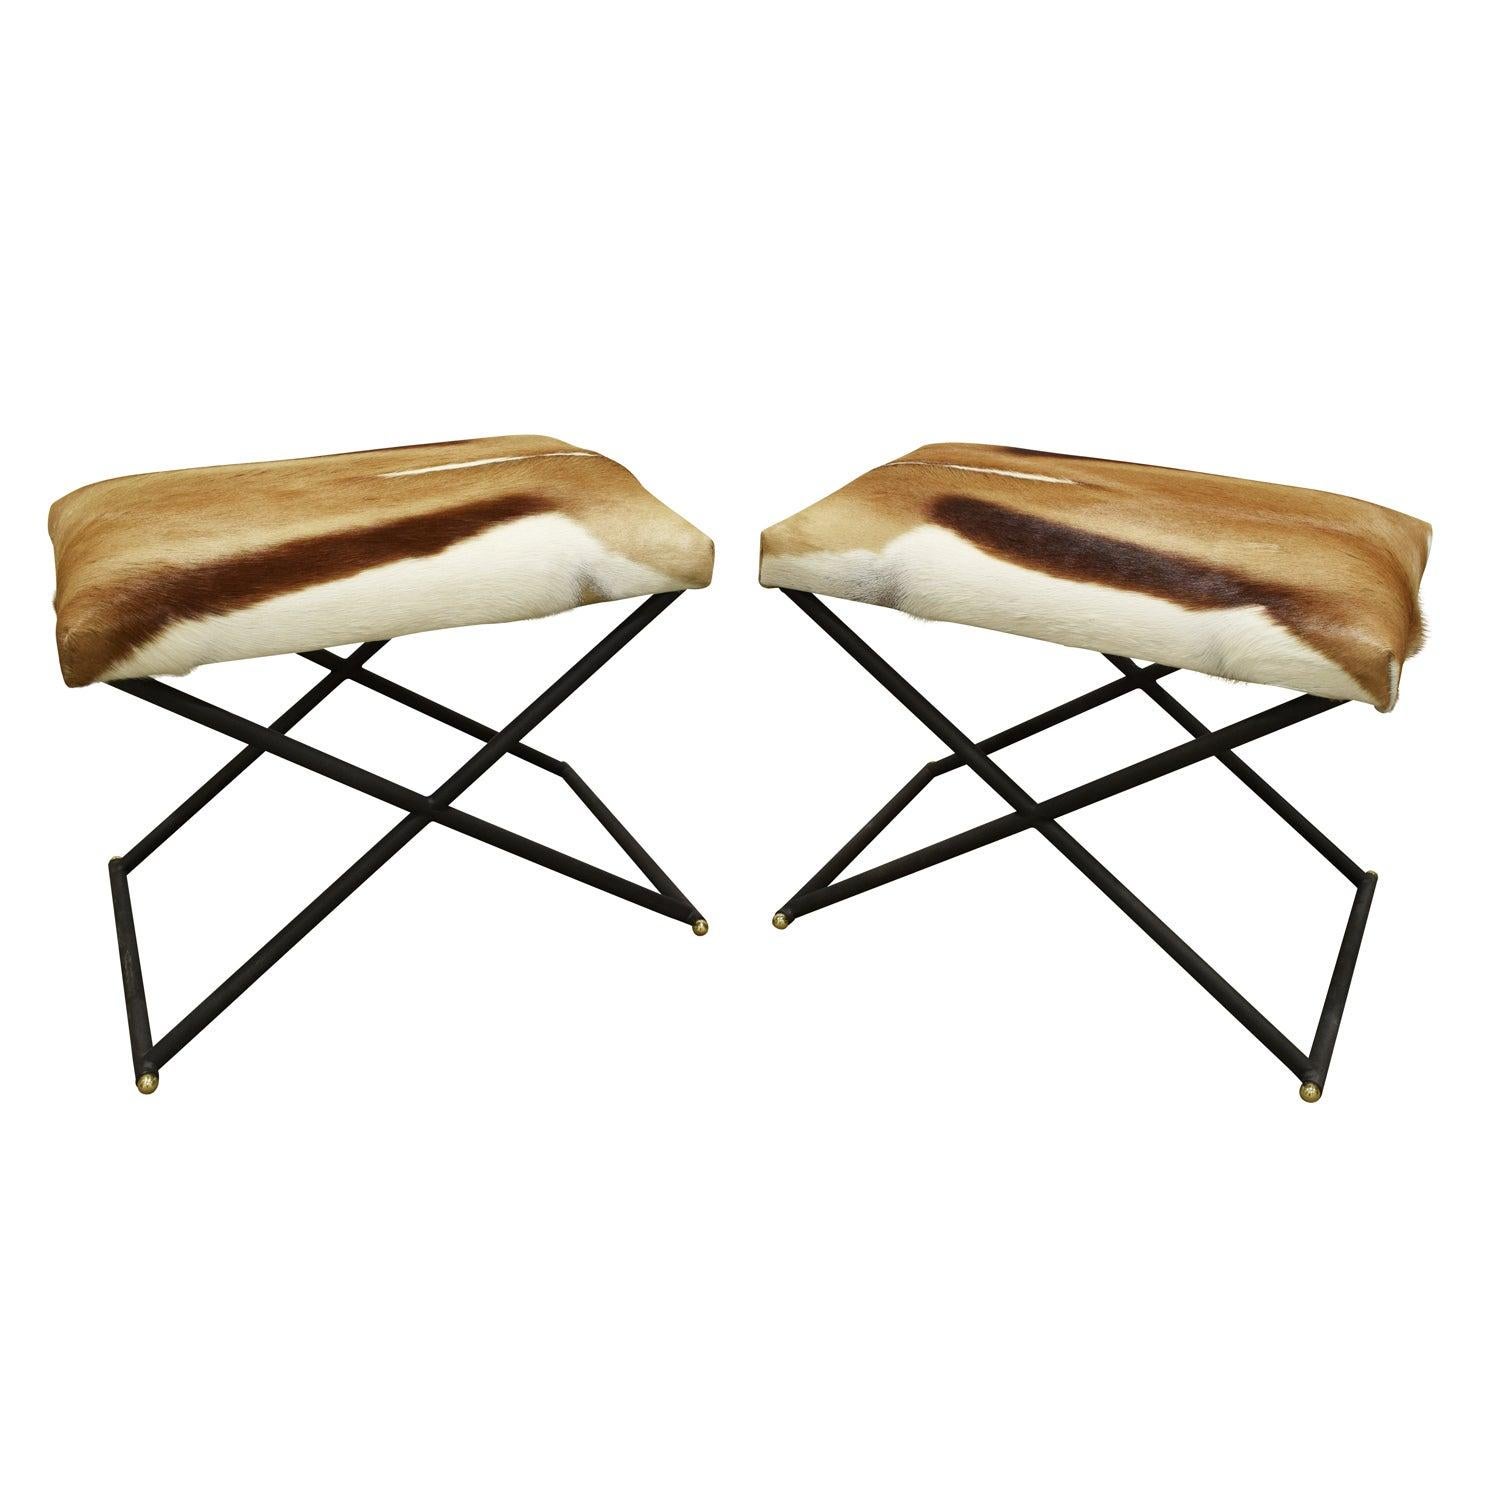 Karl Springer Pair of X Benches with Springbok Seats, 1970s